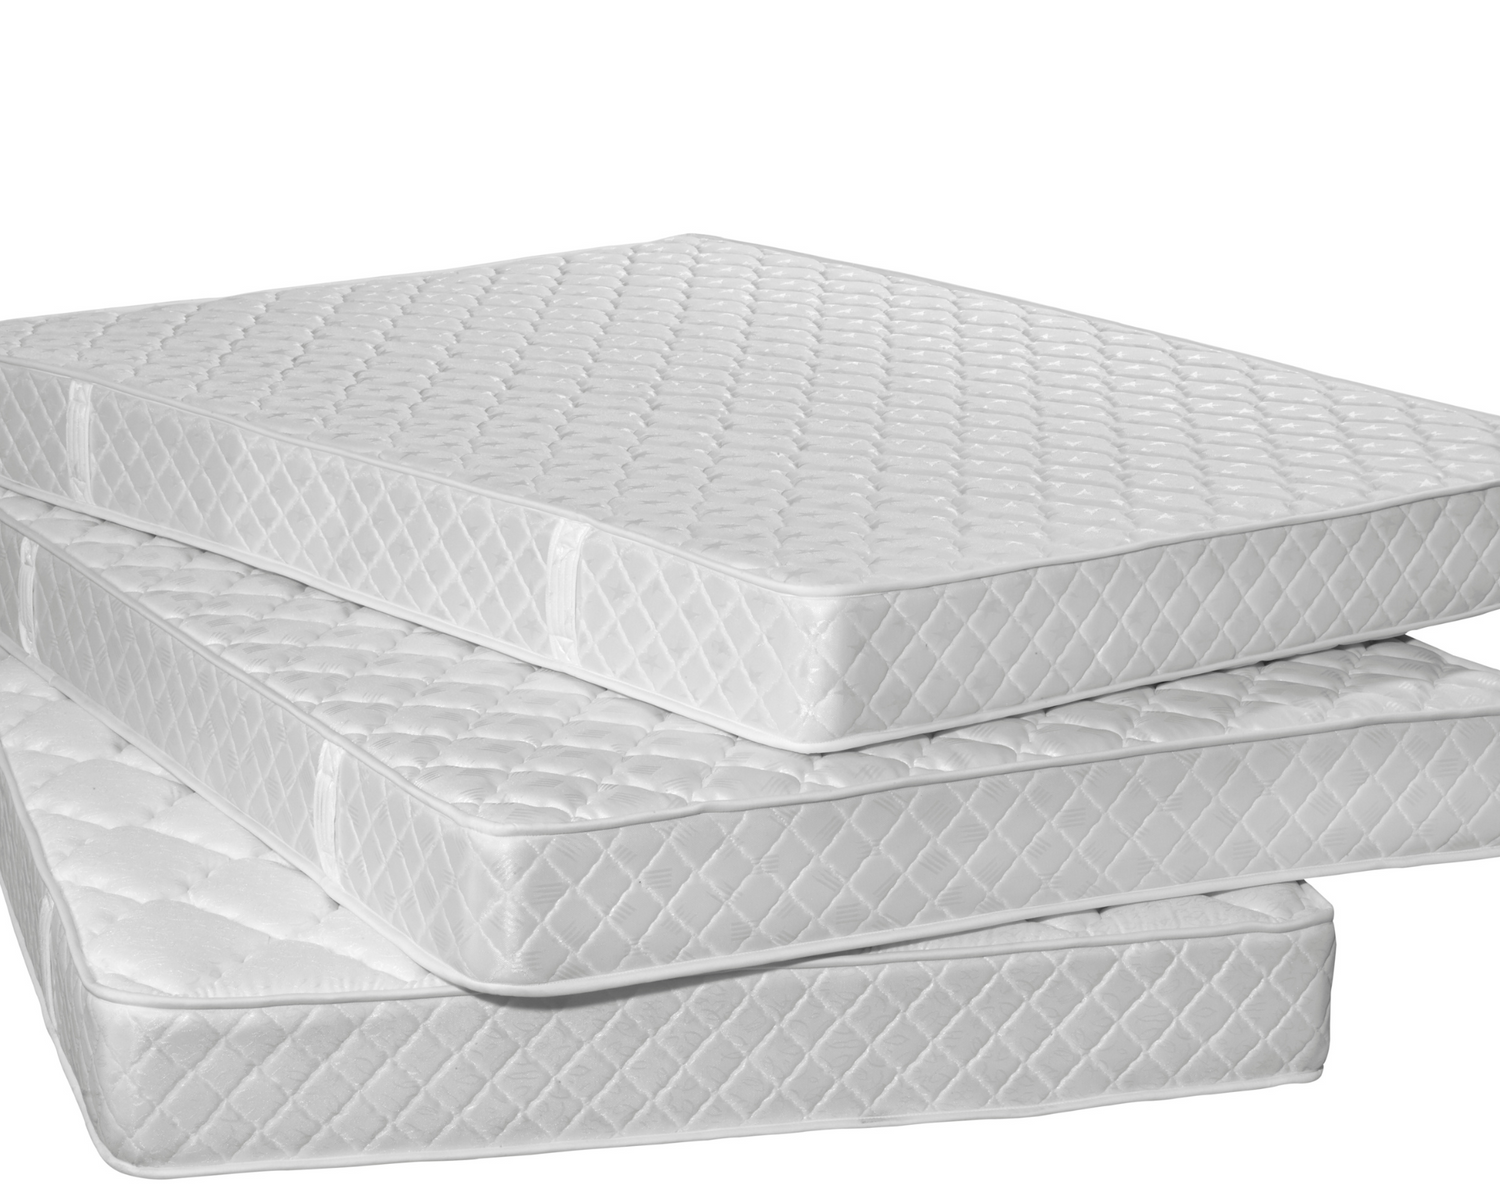 A Stock Pile of Made to Measure Mattresses